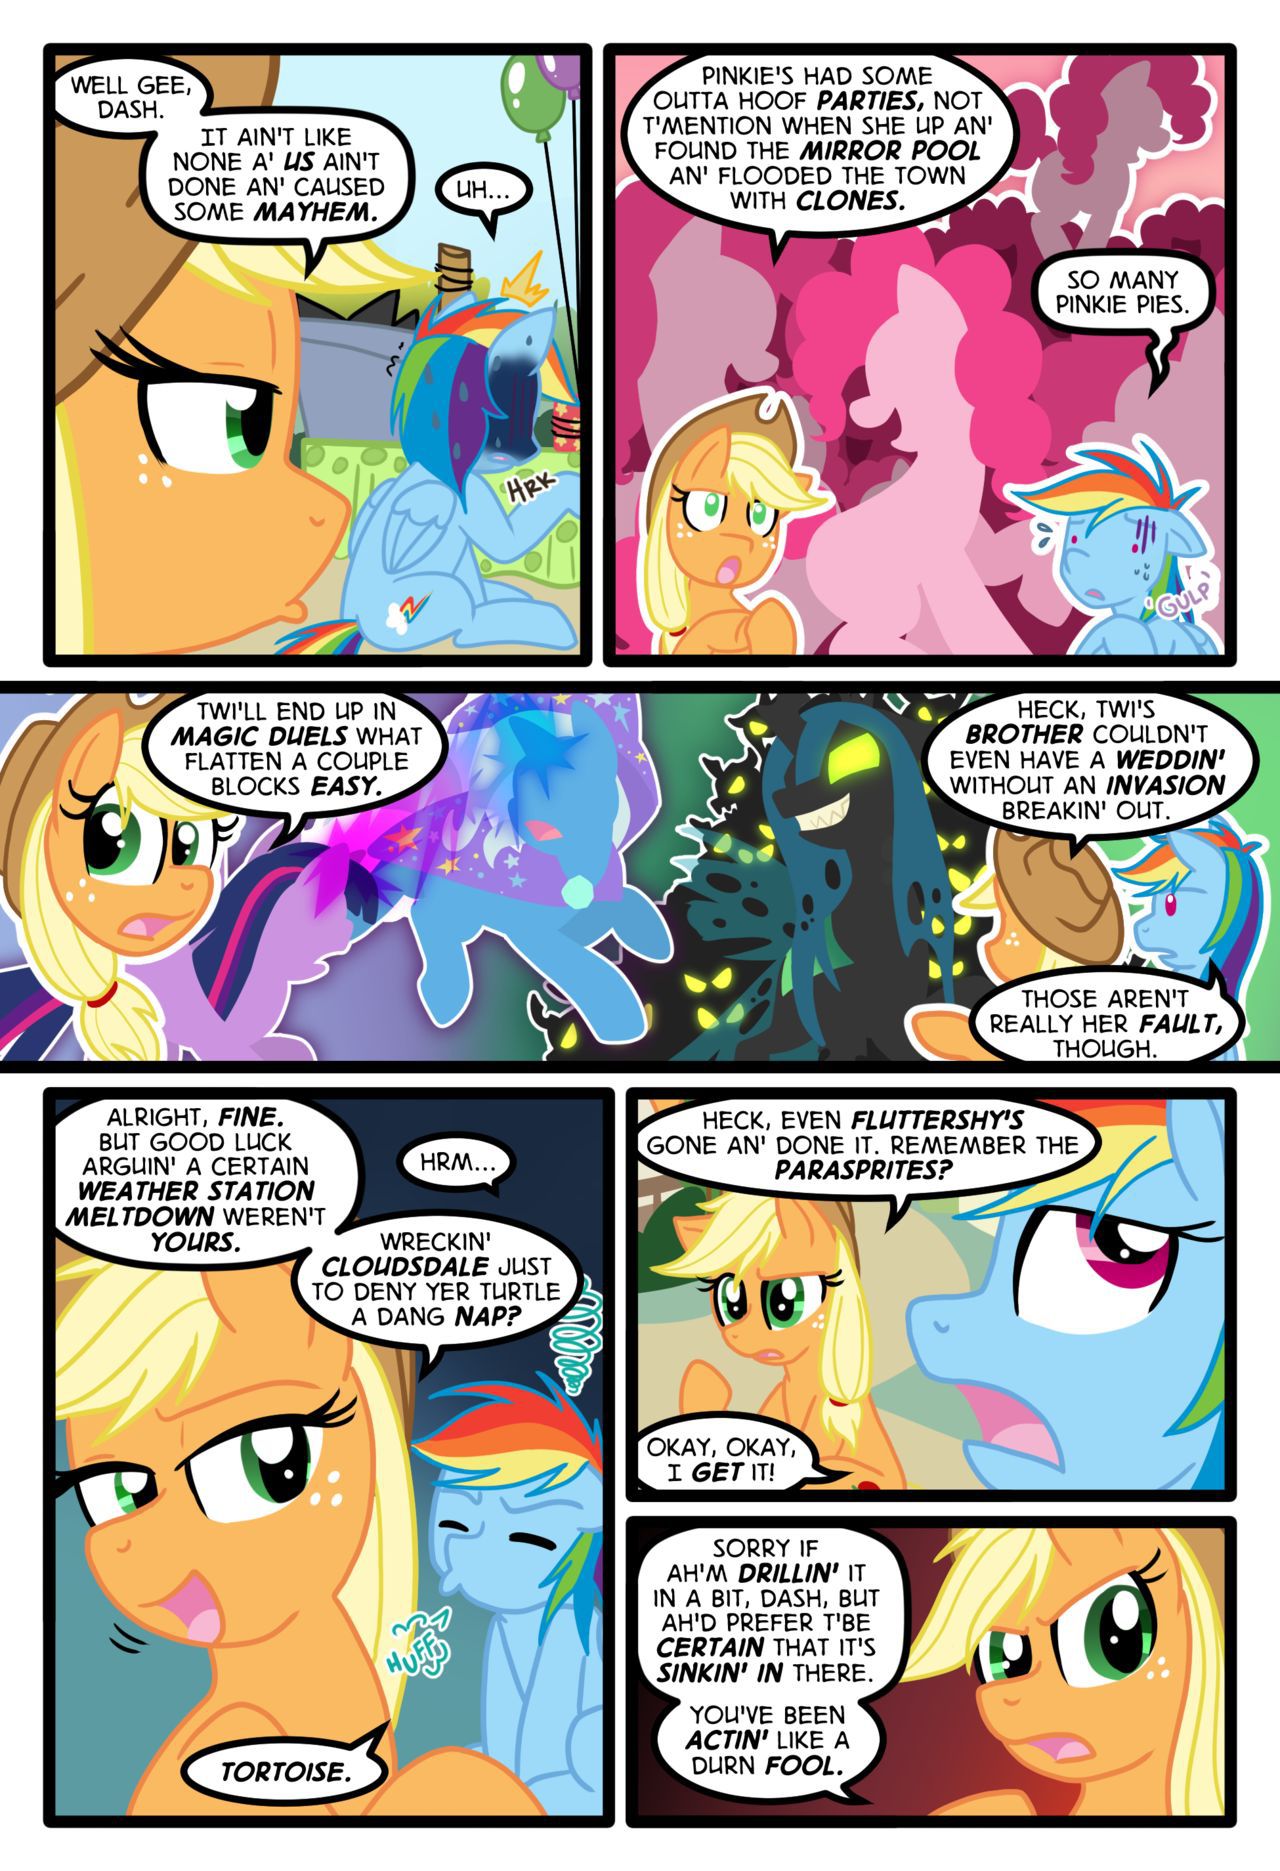 [Zaron] Lonely Hooves (My Little Pony Friendship Is Magic) [Ongoing] 81